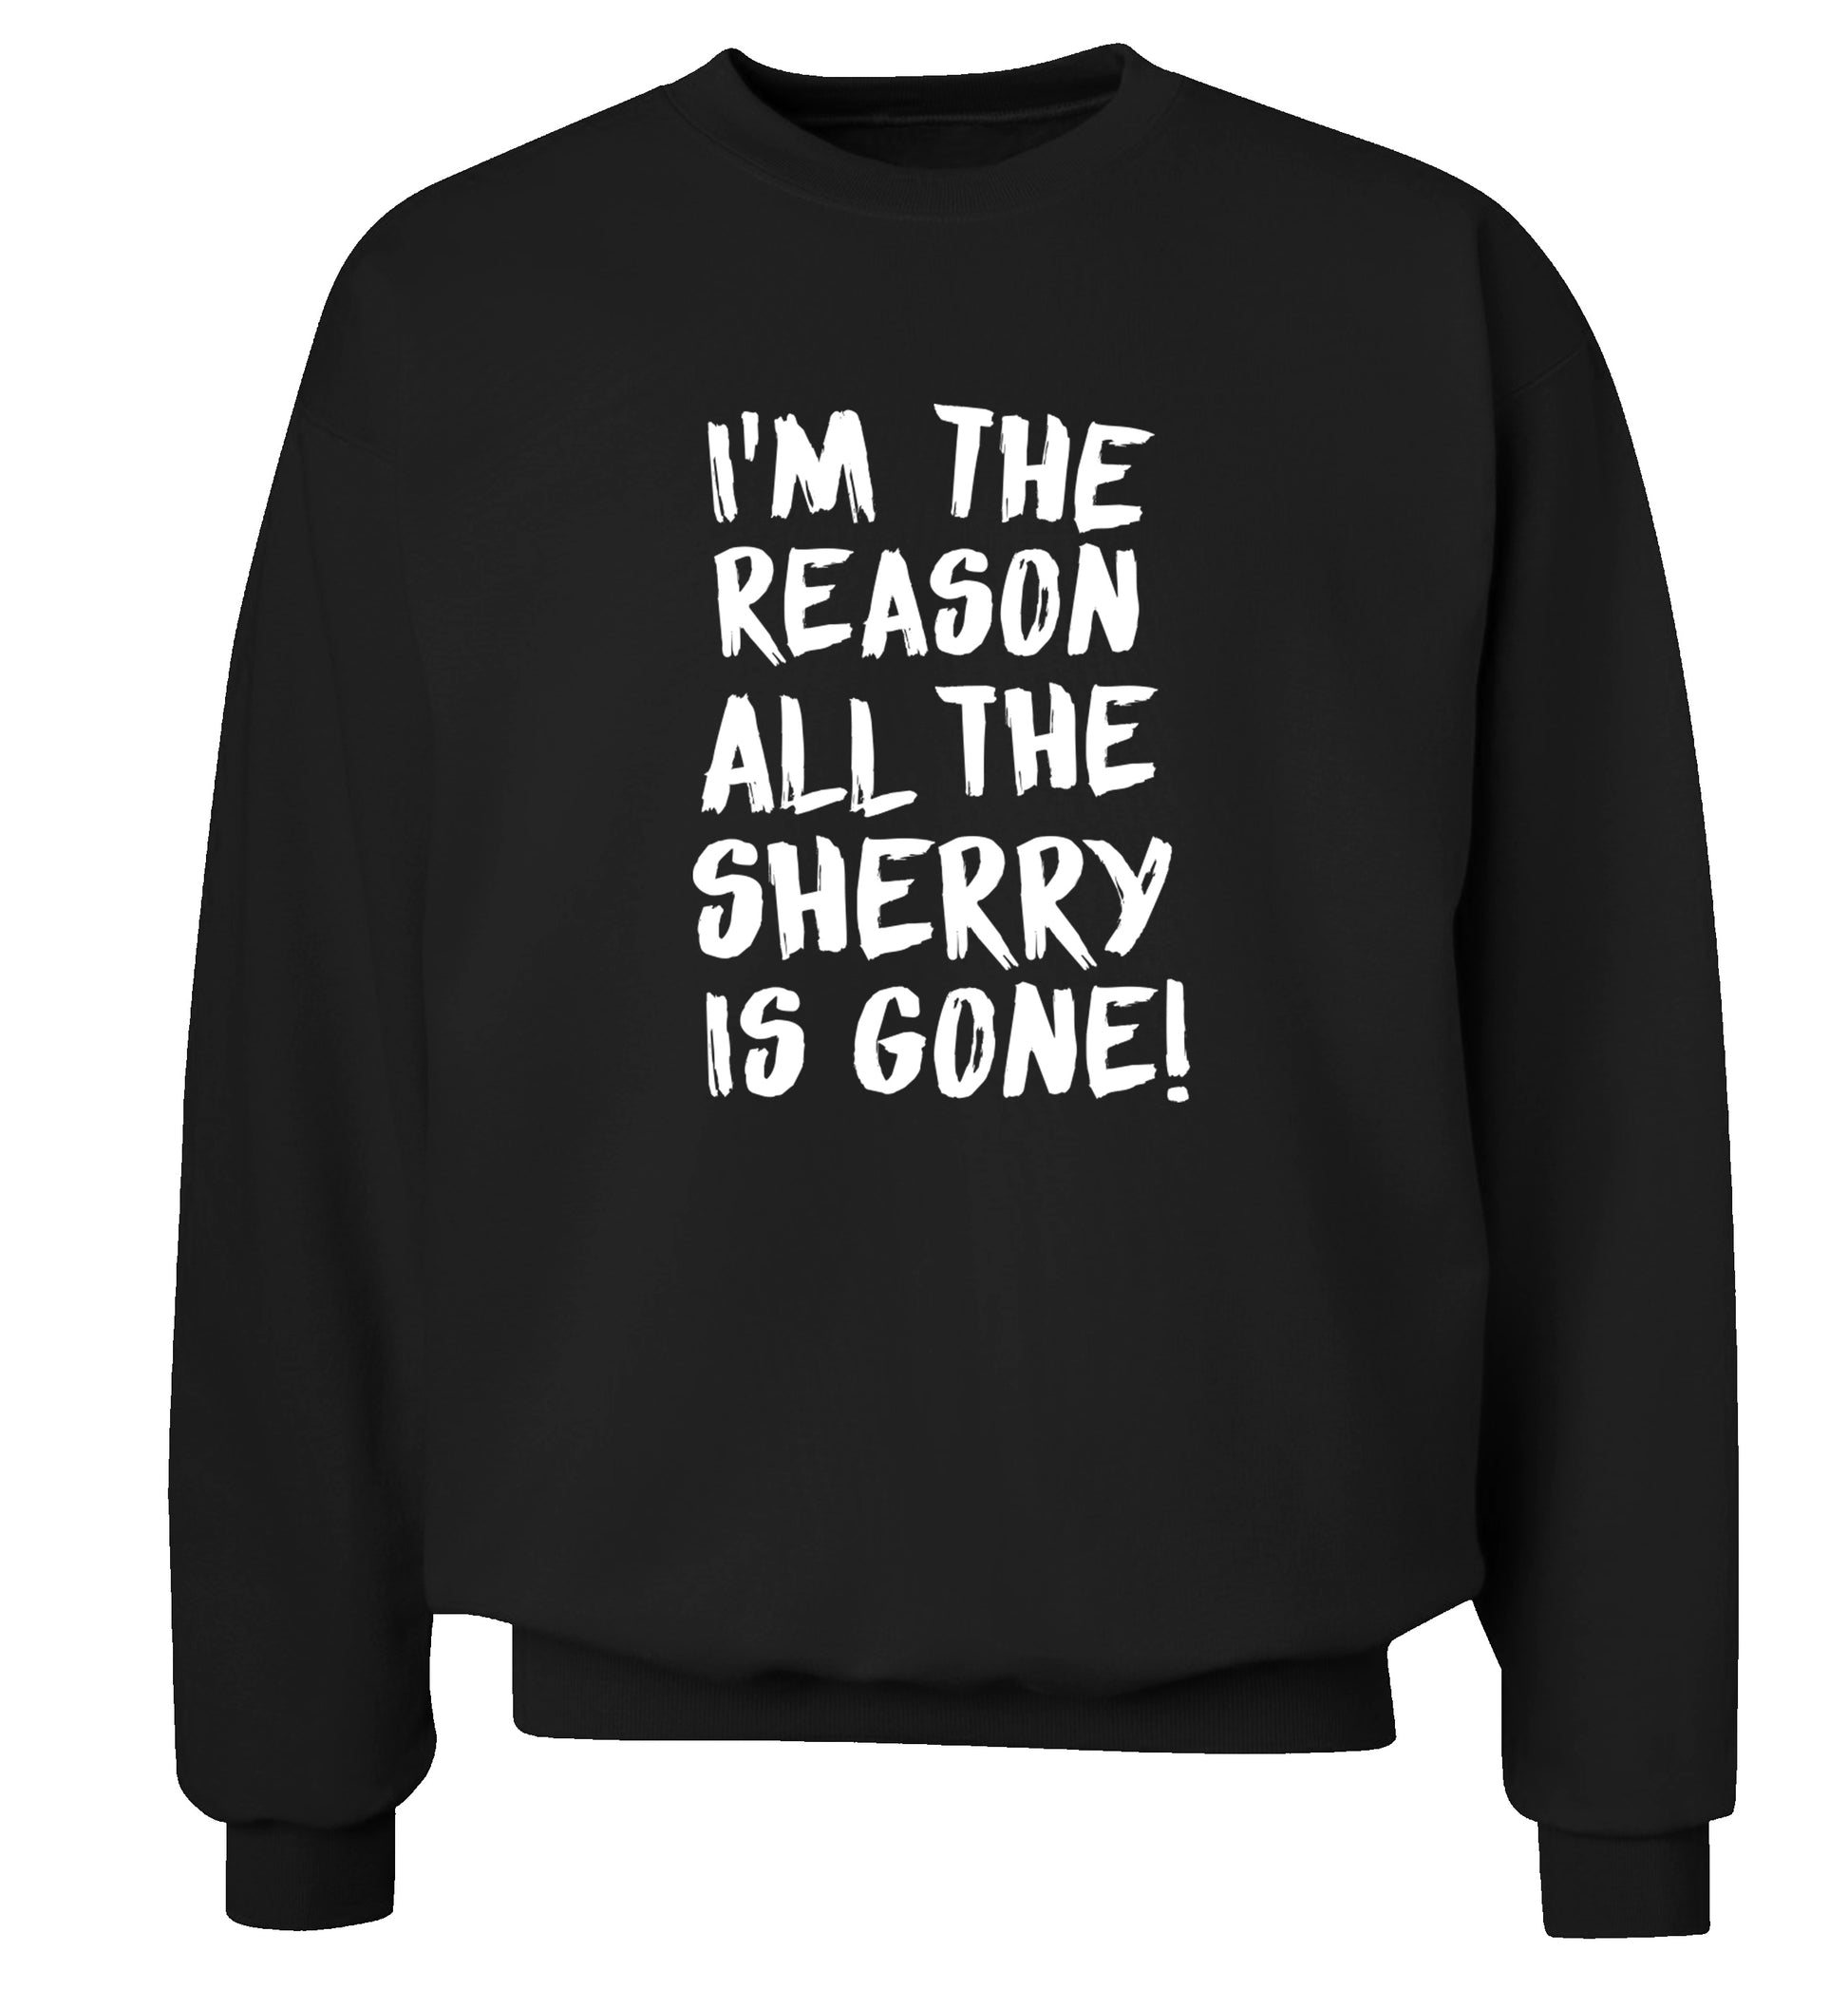 I'm the reason all the sherry is gone Adult's unisex black Sweater 2XL